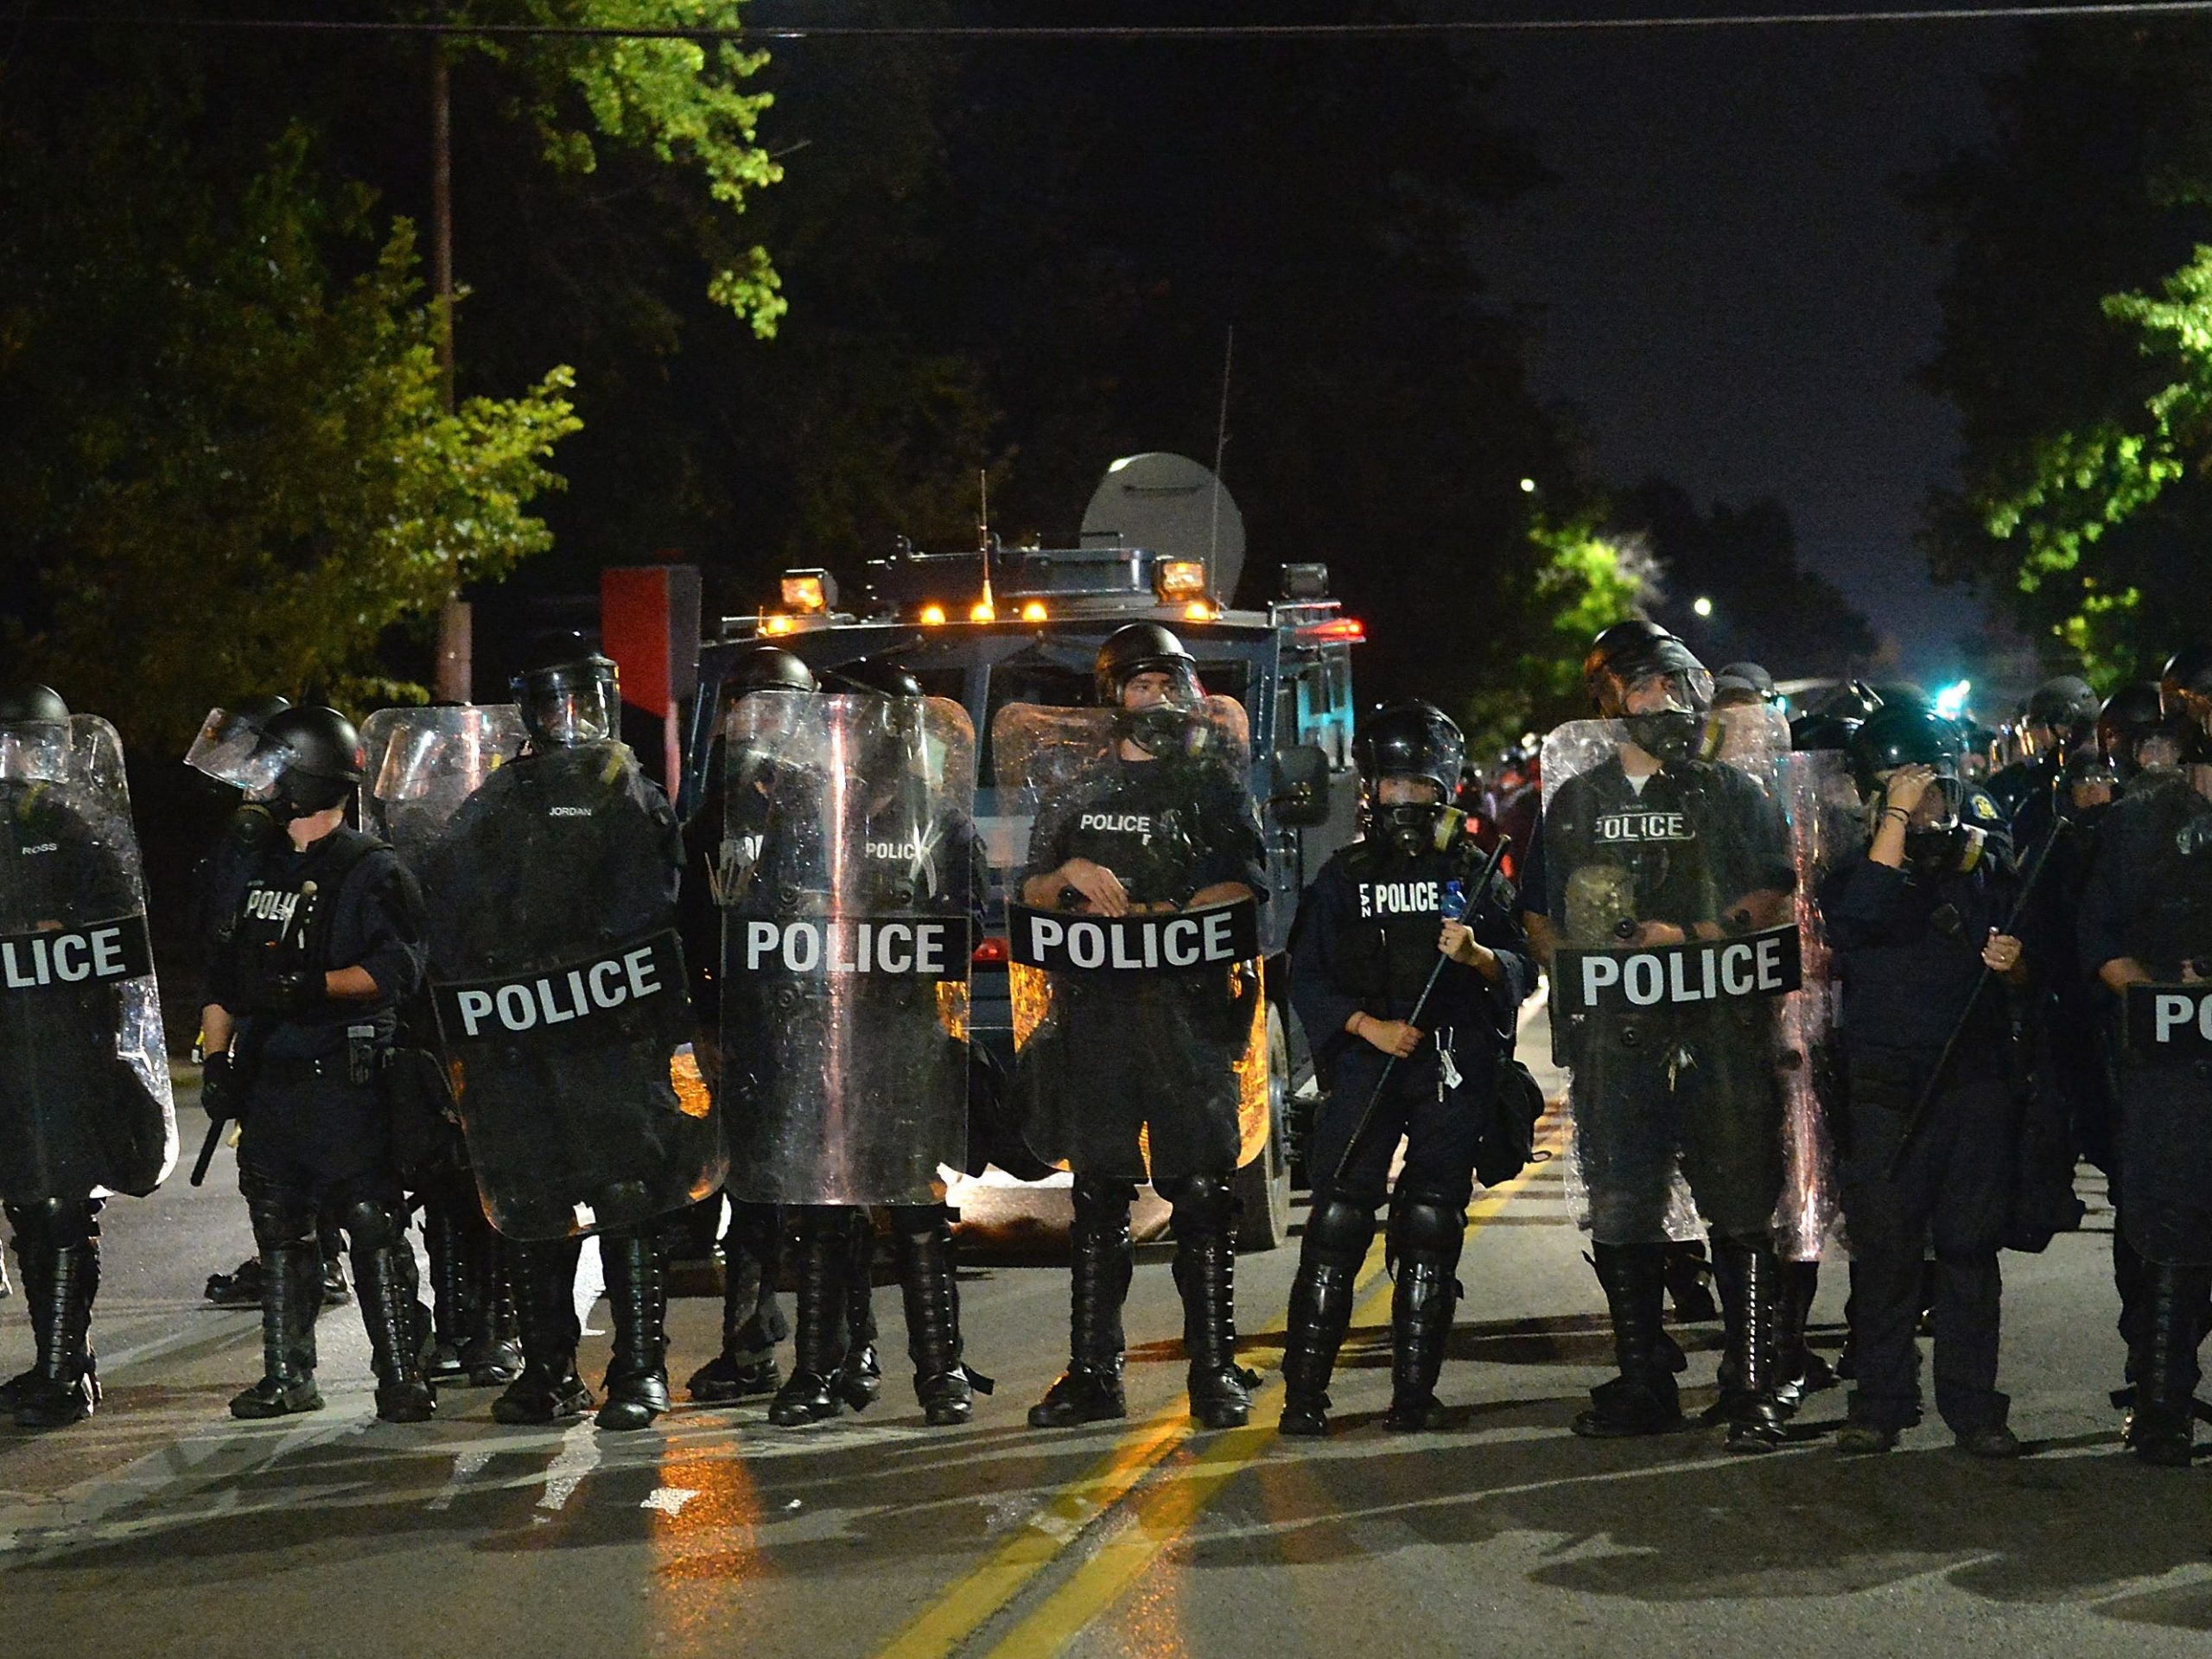 A line of police officers in riot gear stand in a line across a street.